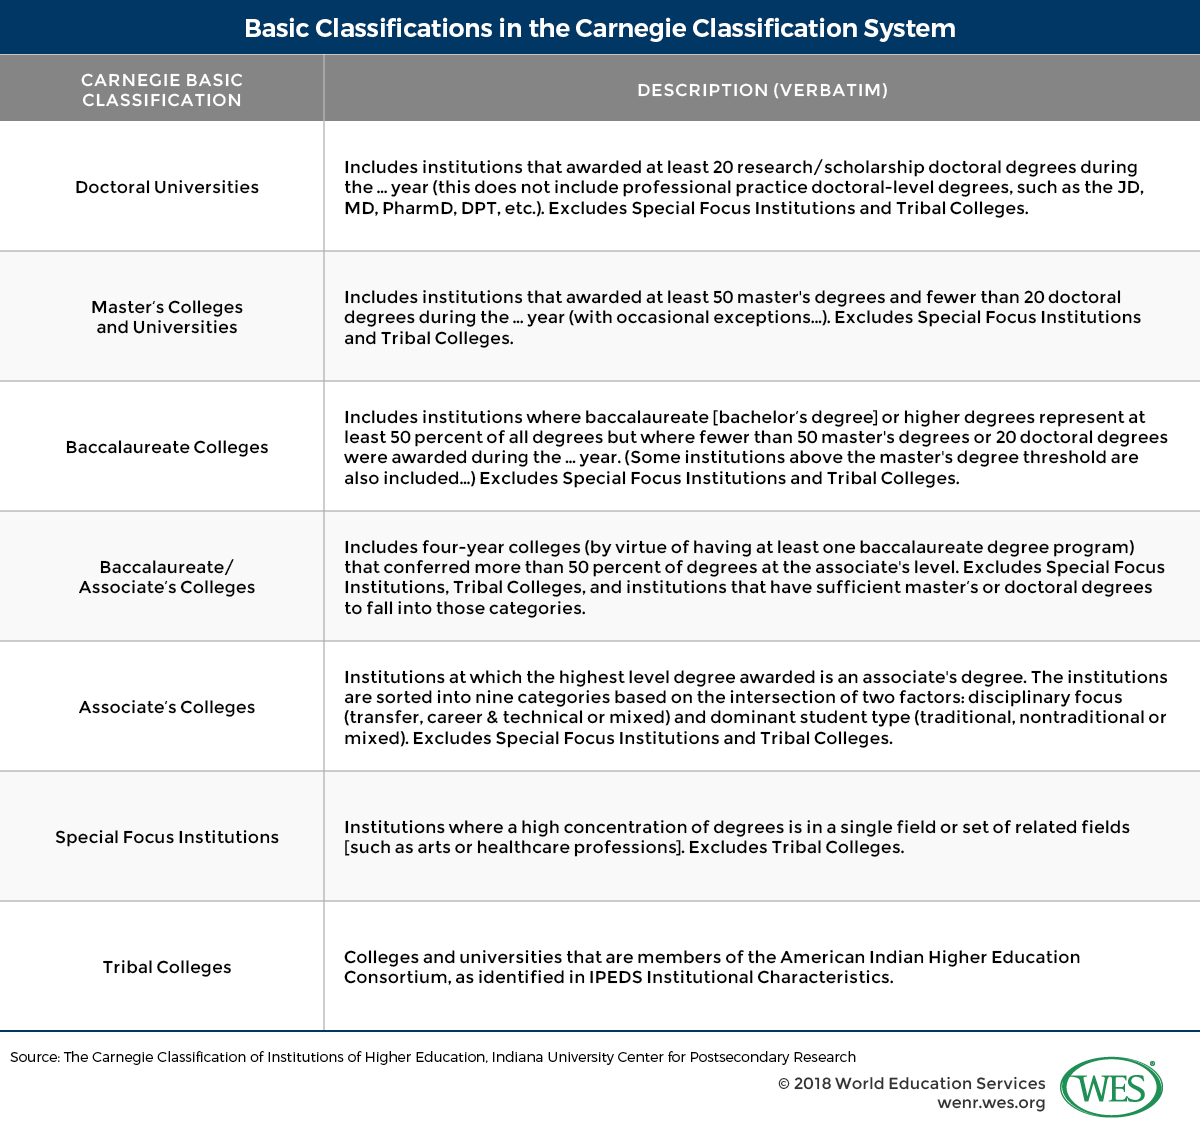 A table showing the basic classifications in the Carnegie Classification System. 